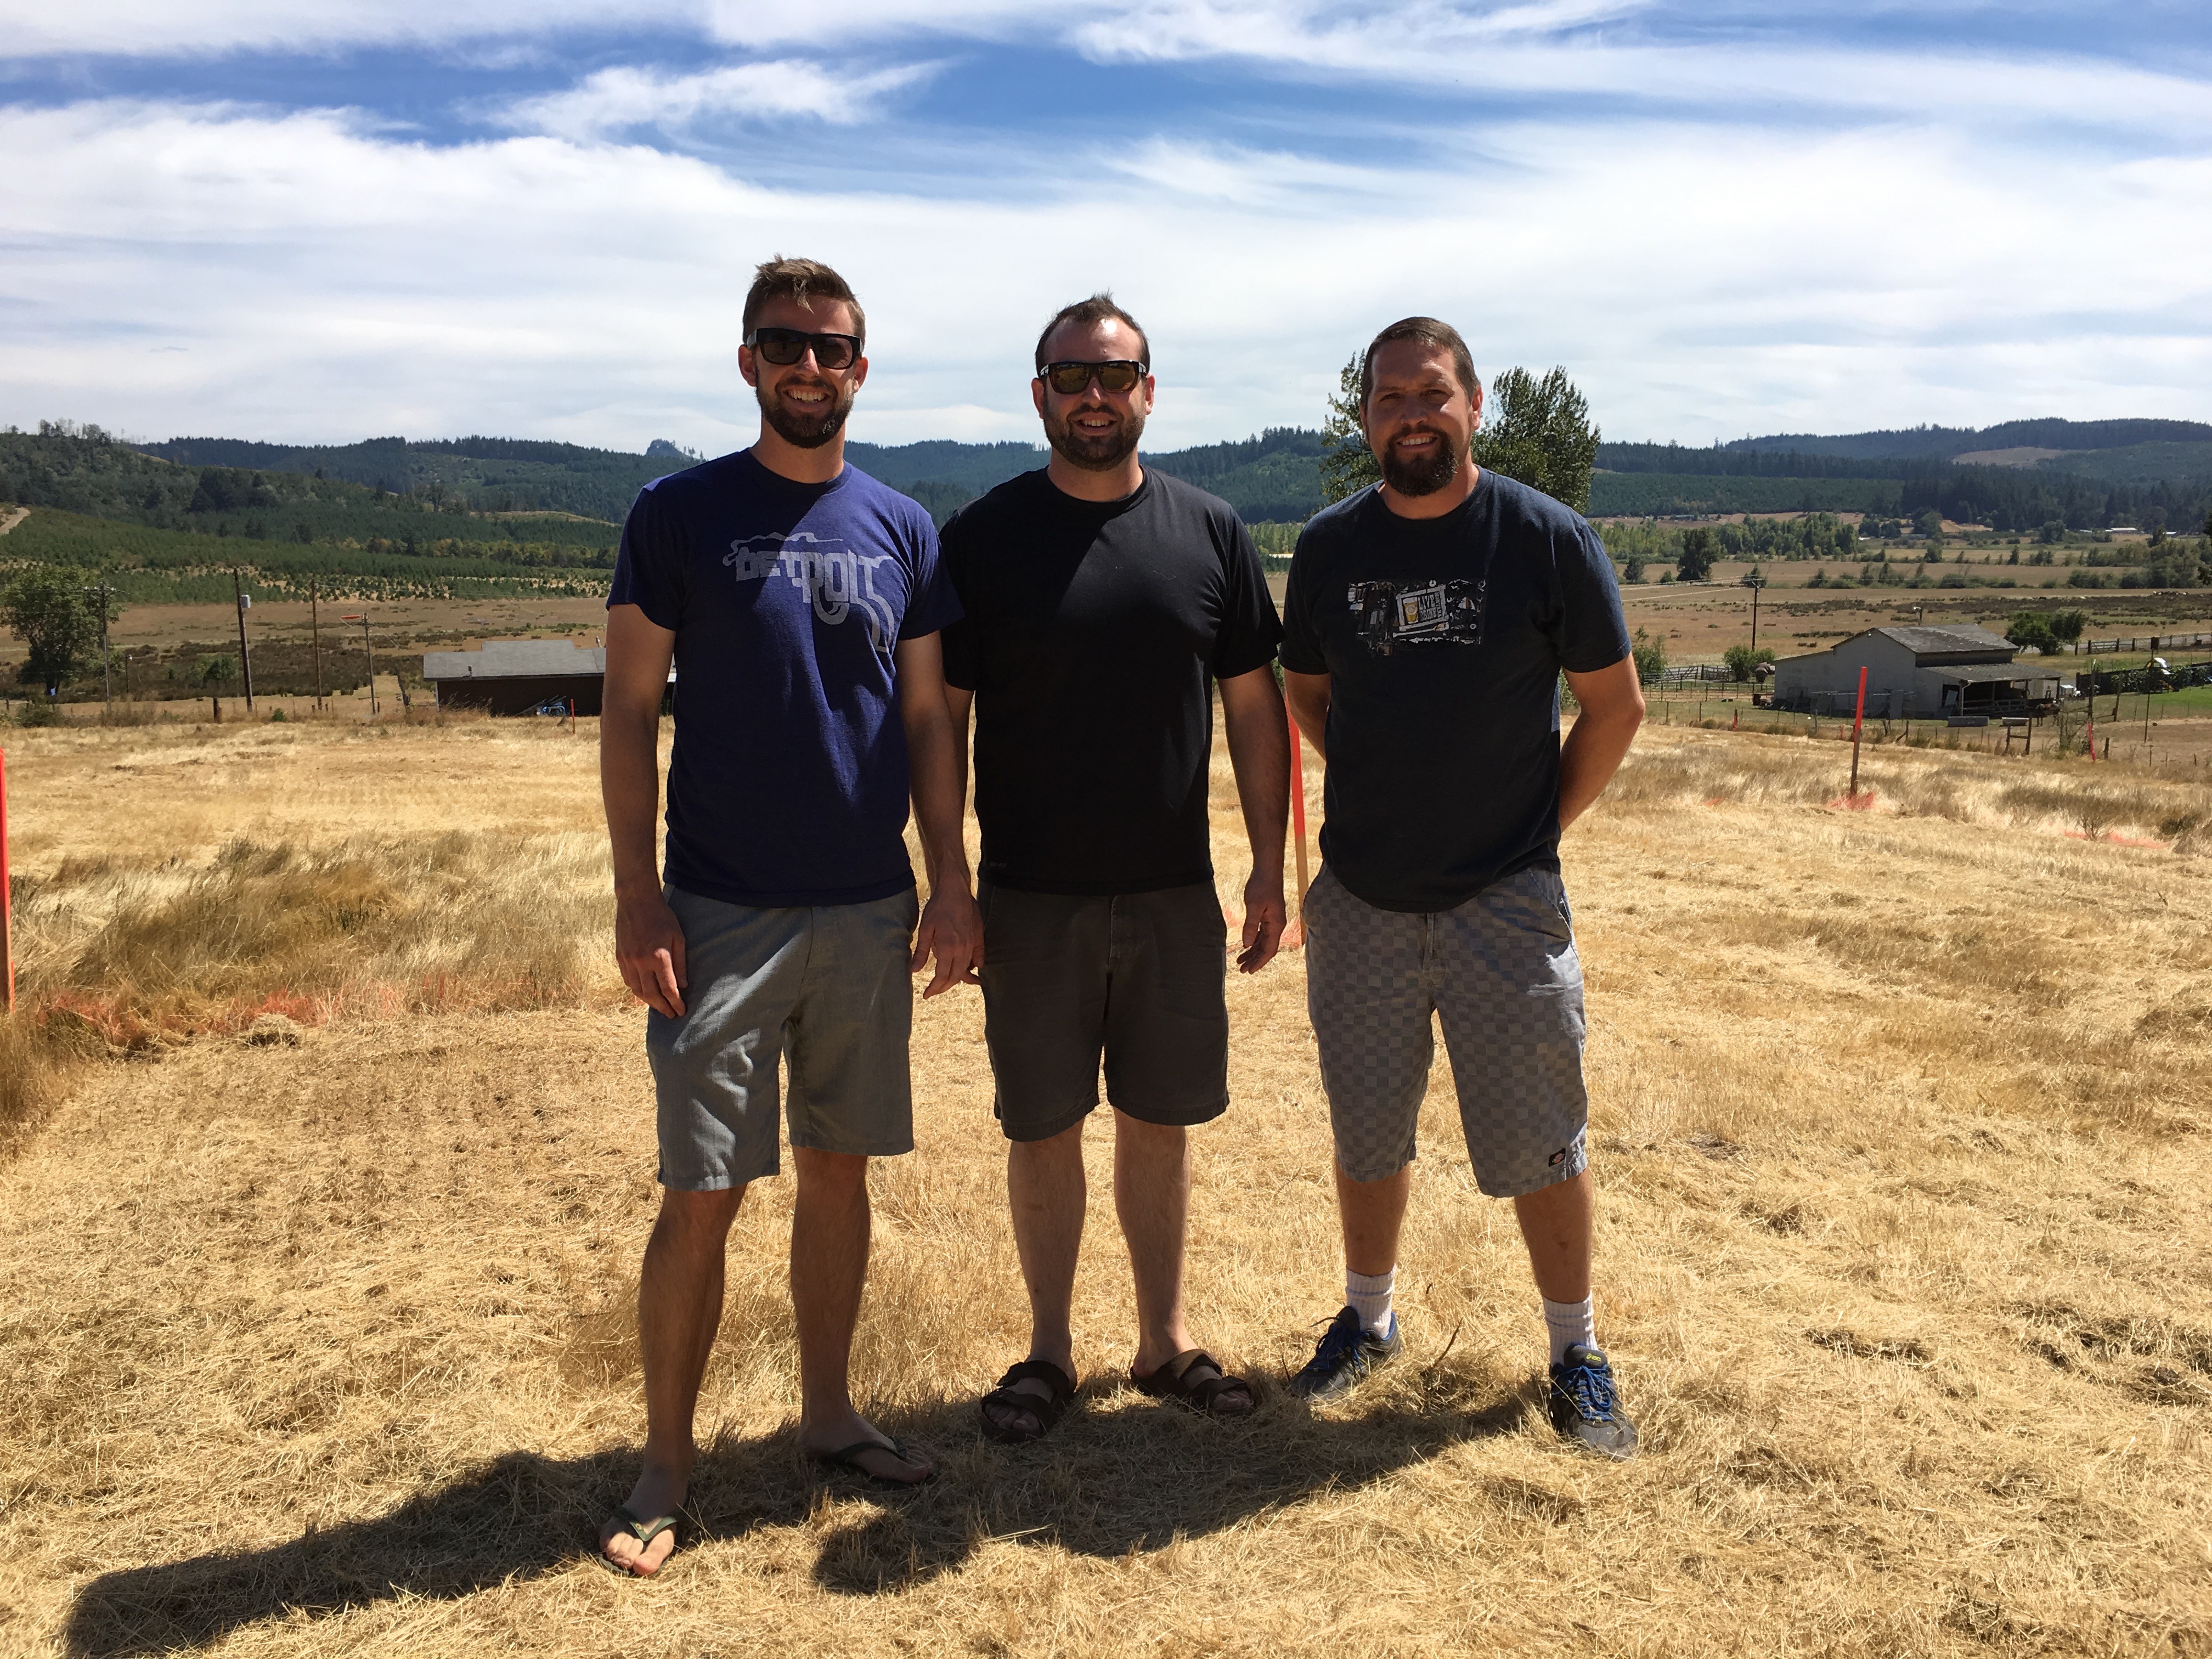 Alesong Brewing & Blending founders, Doug Coombs, Brian Coombs and Matt Van Wyk at its new property south of Eugene, Oregon.